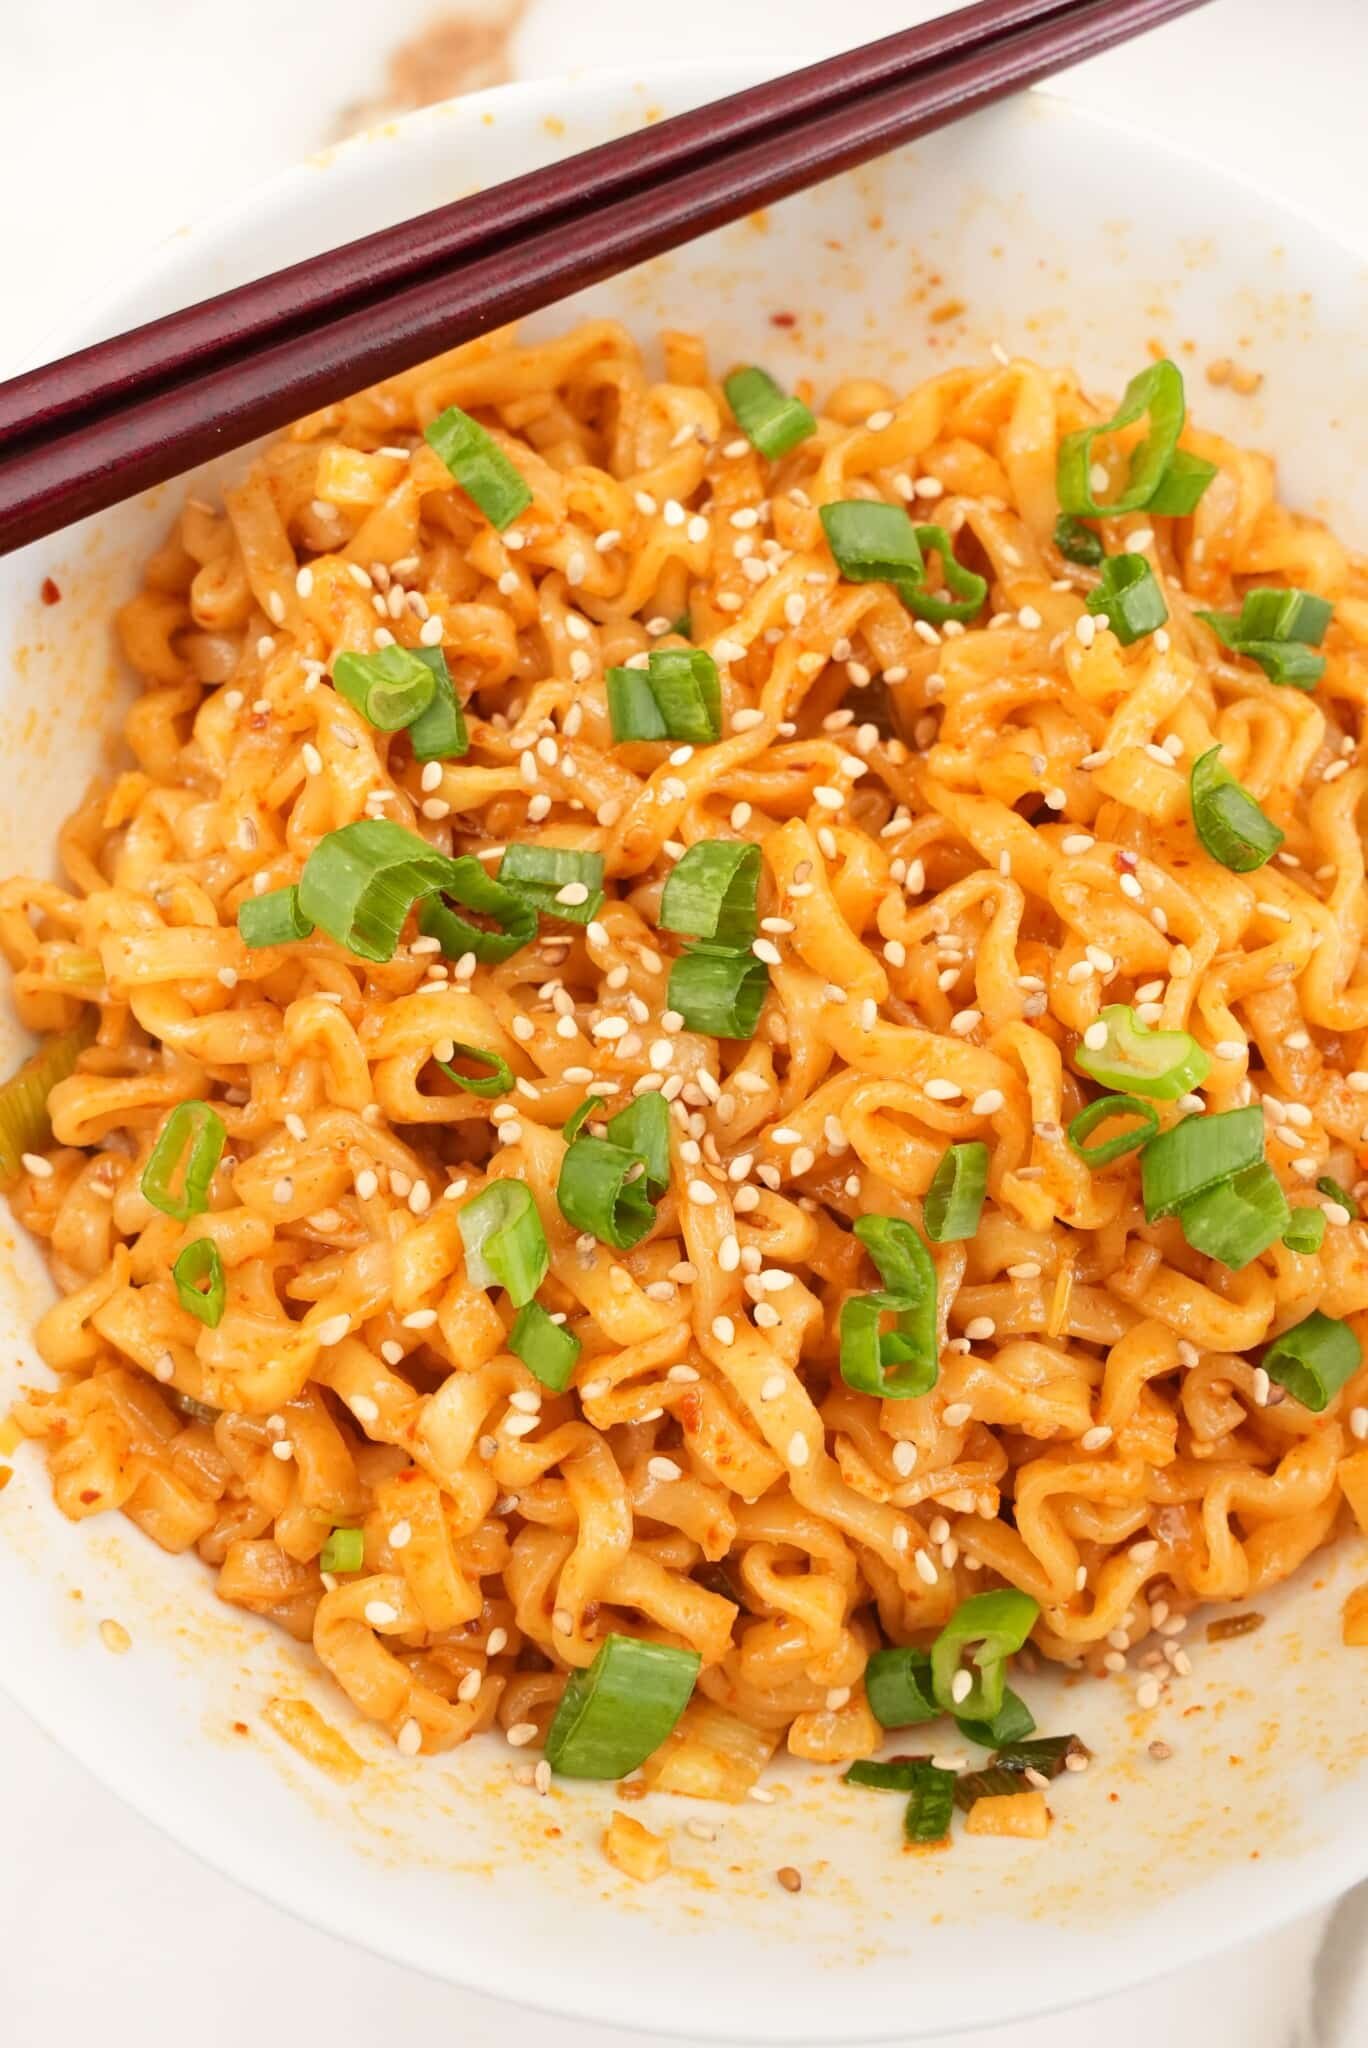 33 Spicy Recipes That Really Bring the Heat - Insanely Good